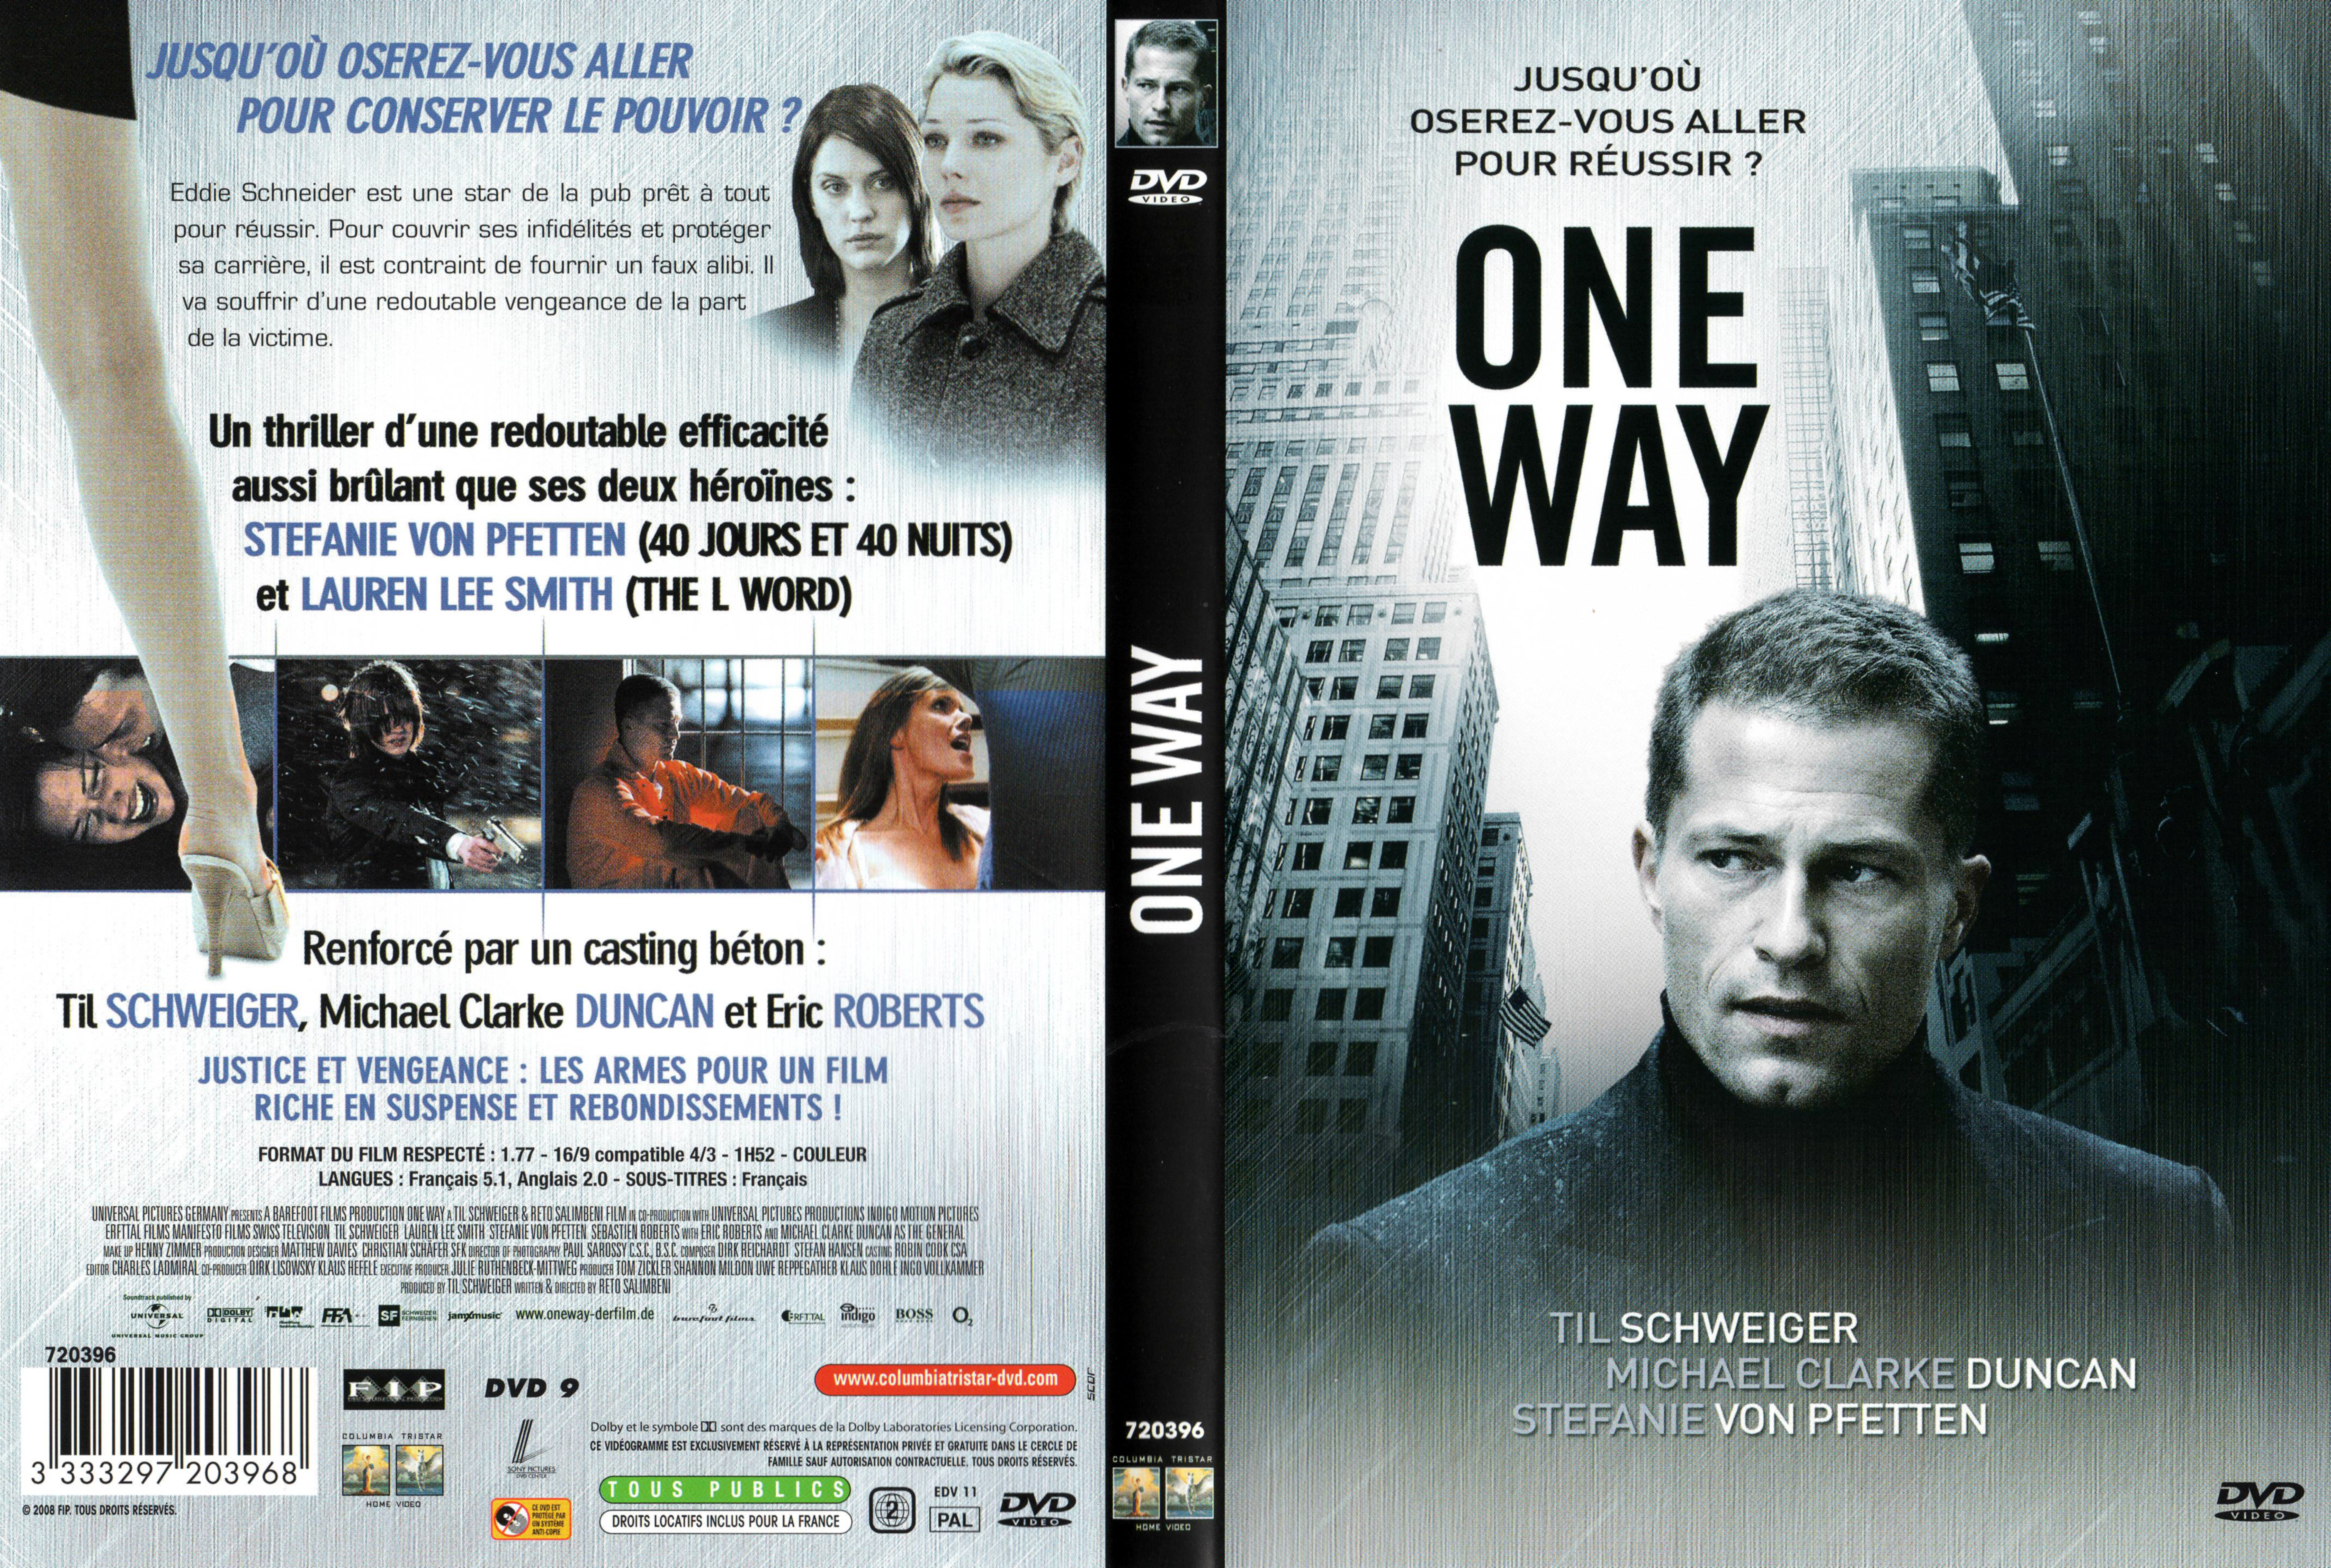 Jaquette DVD One way